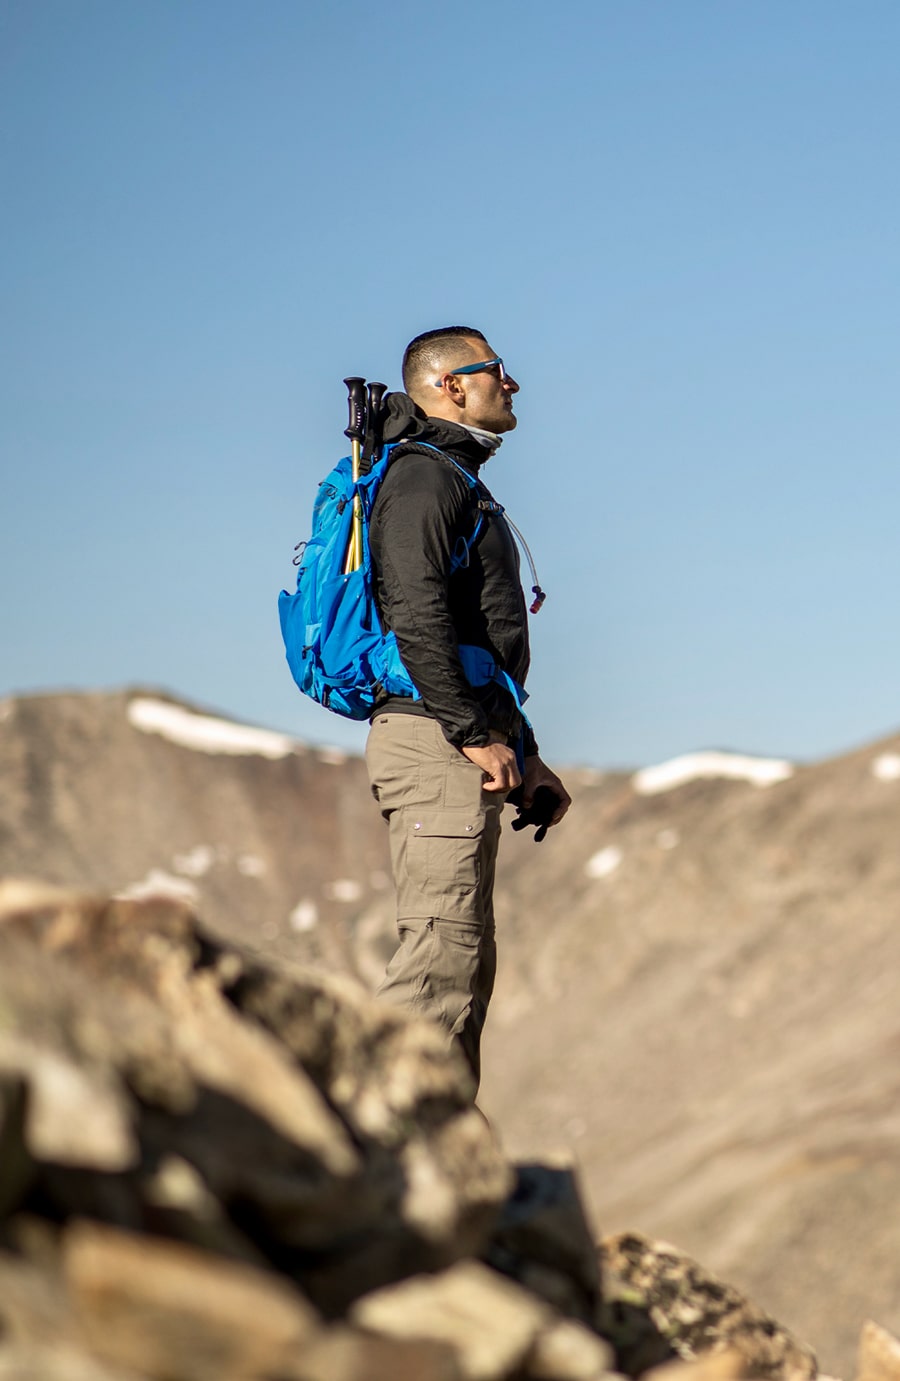 Dr. Cassio Castro, adorned with hiking gear, looking out over a mountain view